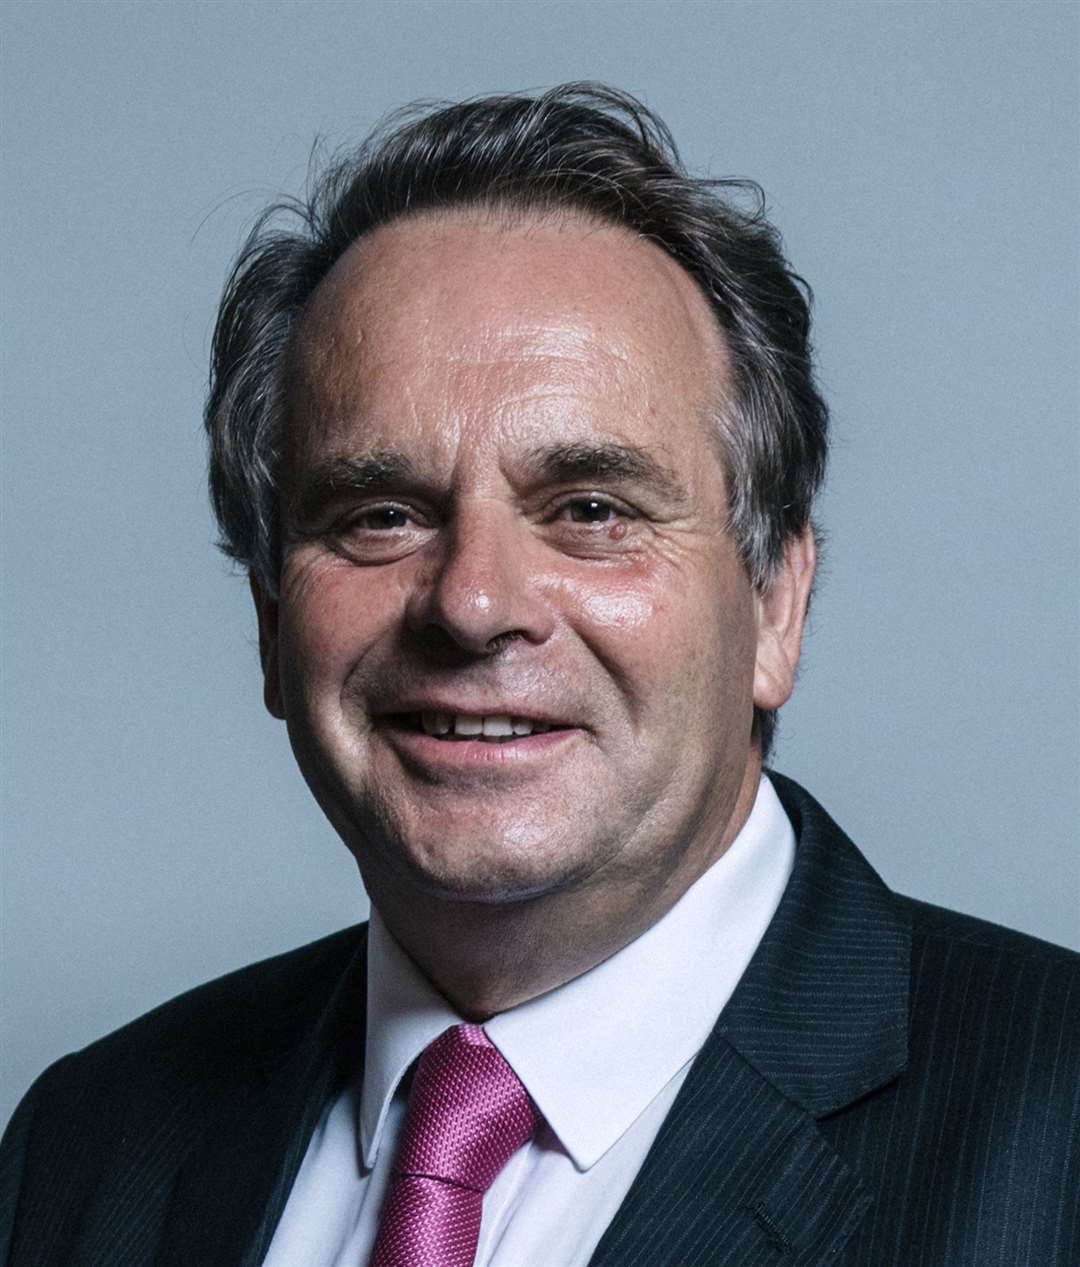 Neil Parish quit his seat in Tiverton and Honiton after admitting watching pornography in the Commons (Chris McAndrew/UK Parliament/PA)